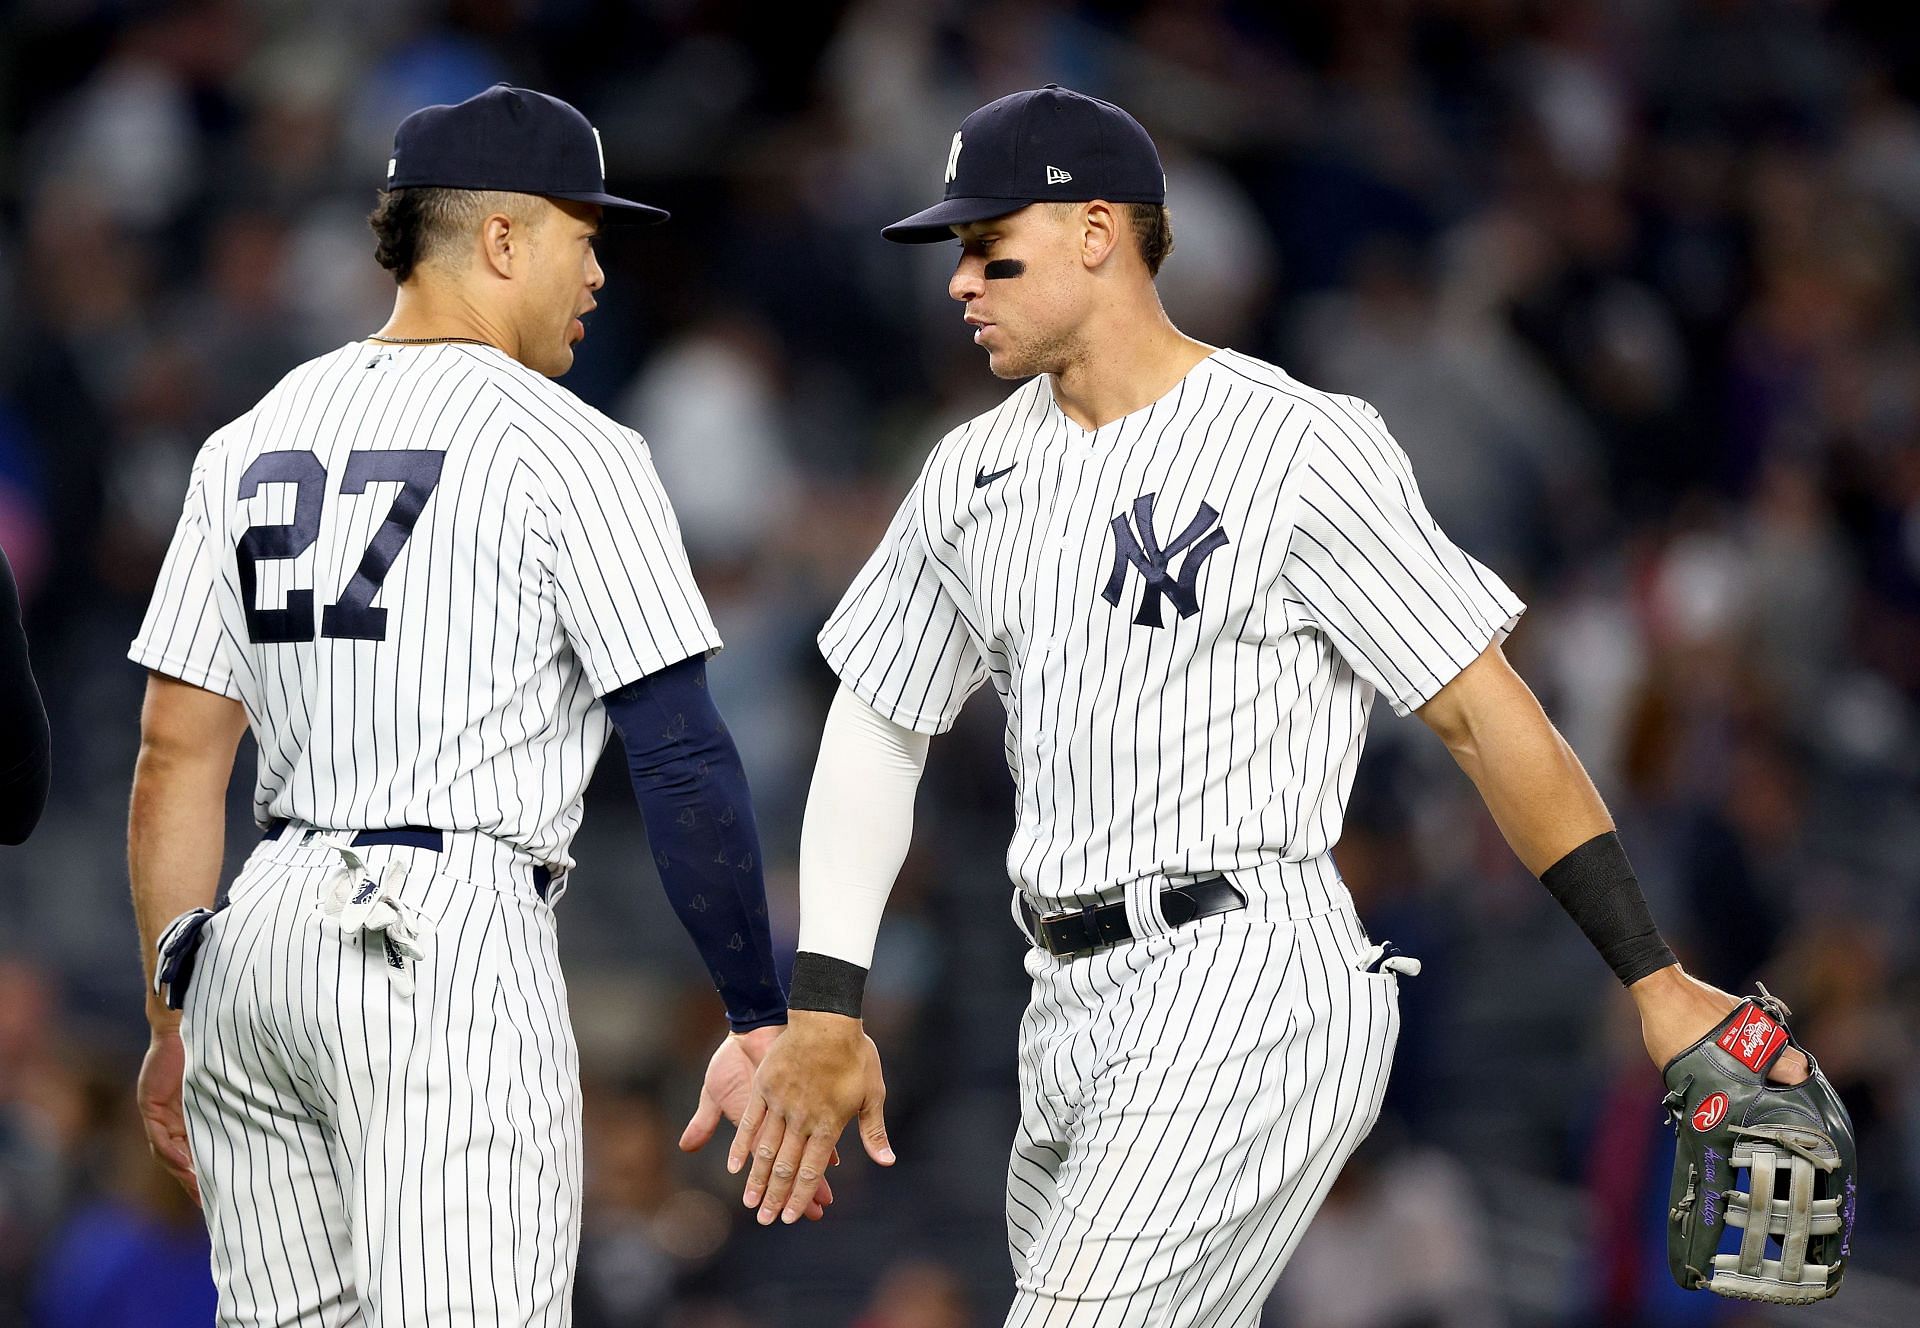 New York Yankees outfielders Giancarlo Stanton and Aaron Judge both hit first-inning home runs against the Minnesota Twins on Tuesday night